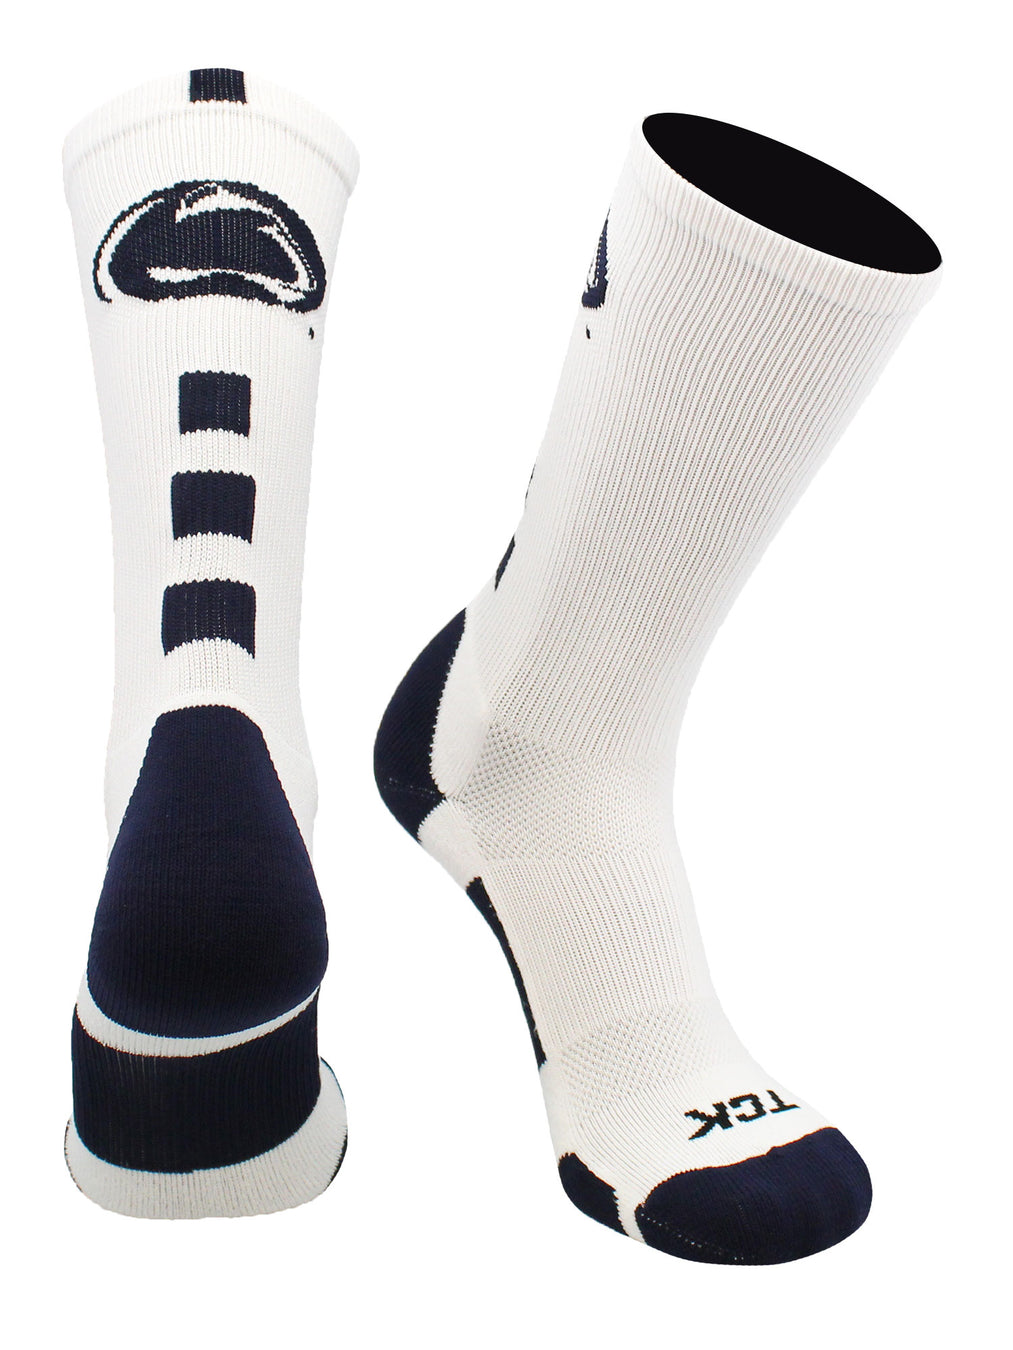 Penn State Nittany Lions Socks - White and Navy with Penn State logo. Made by TCK